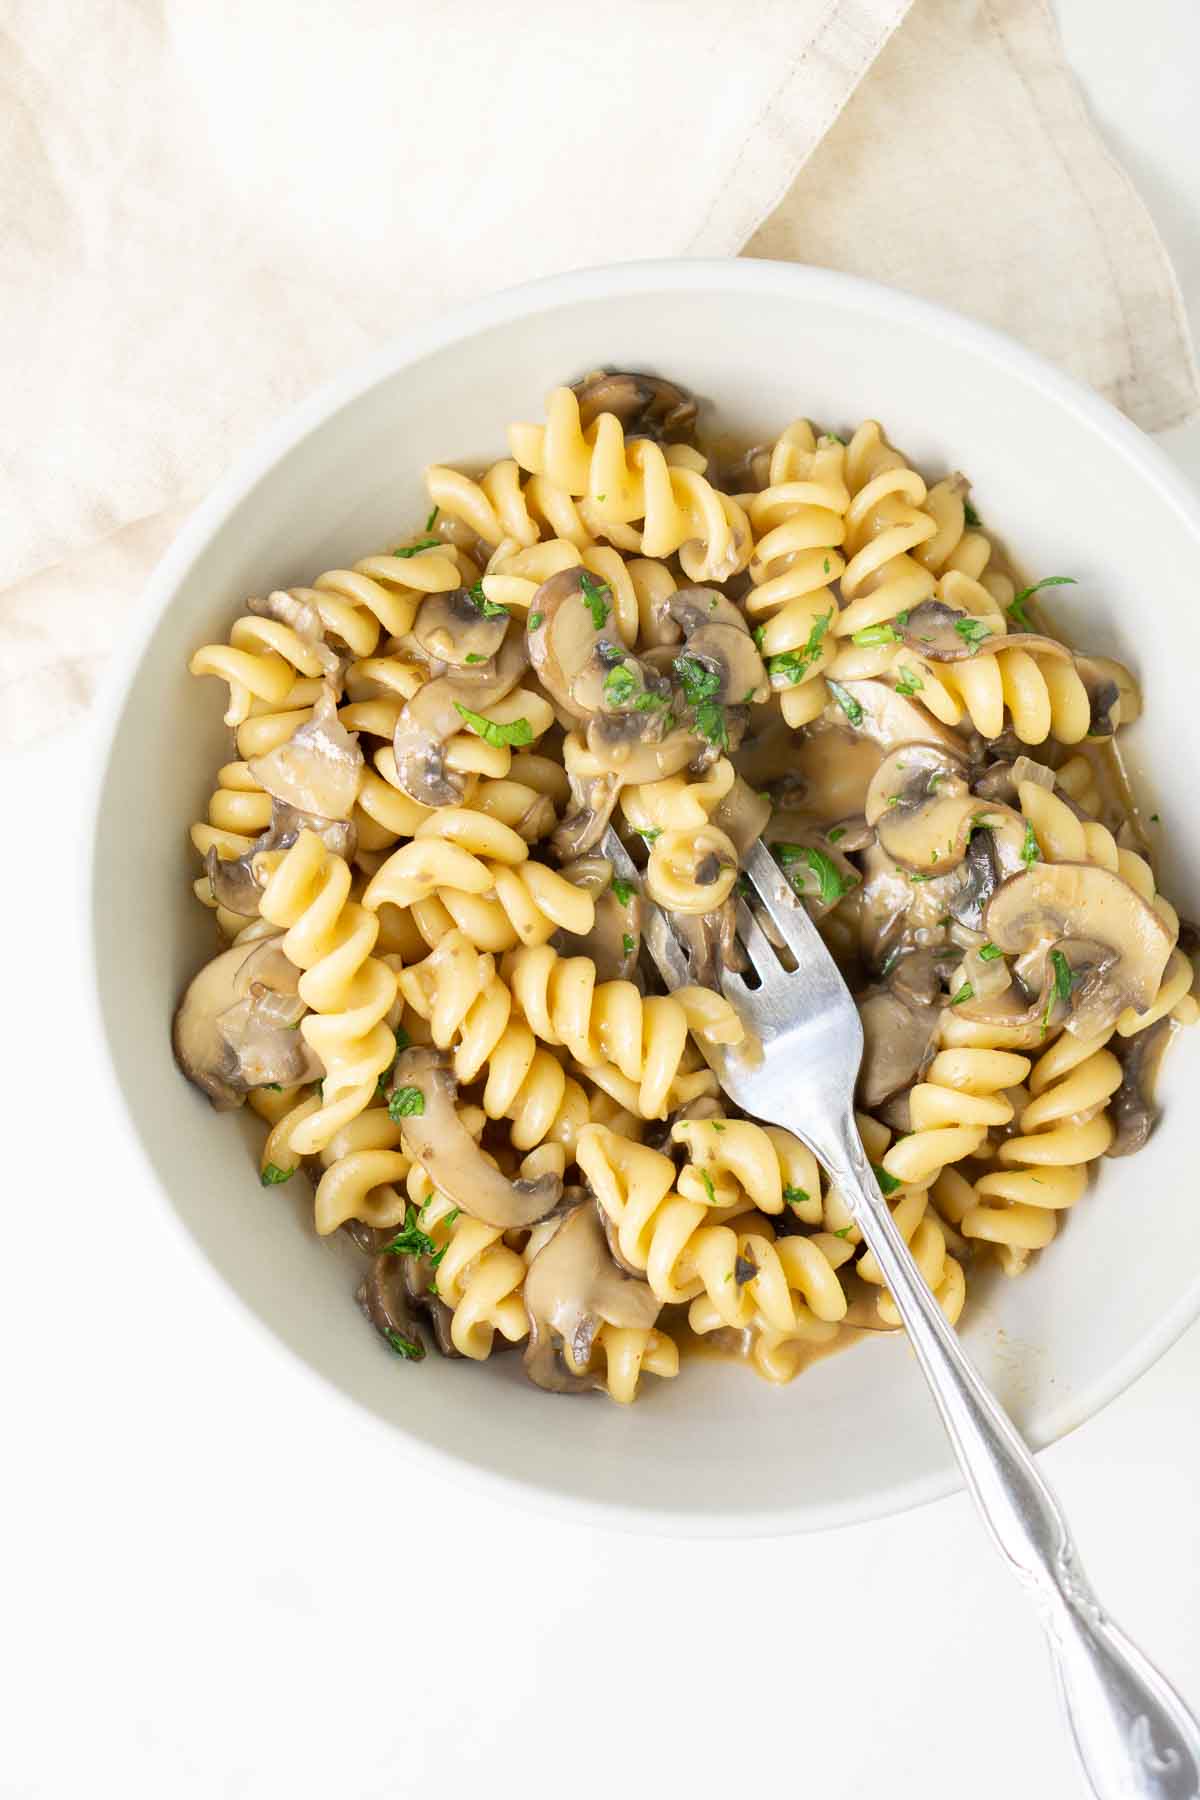 Mushroom stroganoff in a white bowl with a fork.